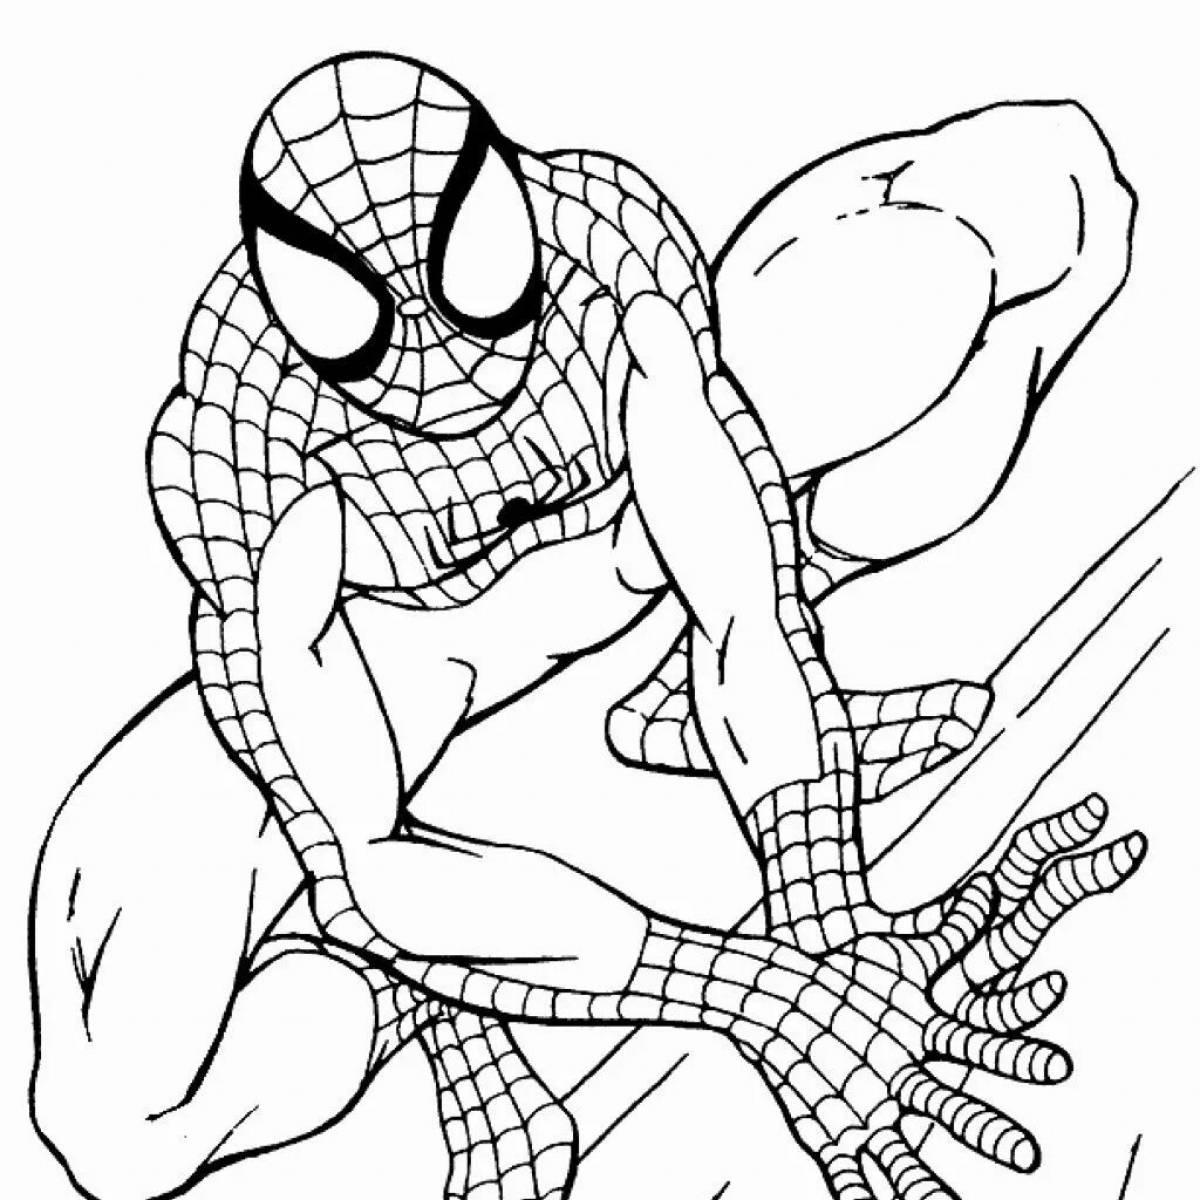 Spiderman's alluring Christmas coloring book